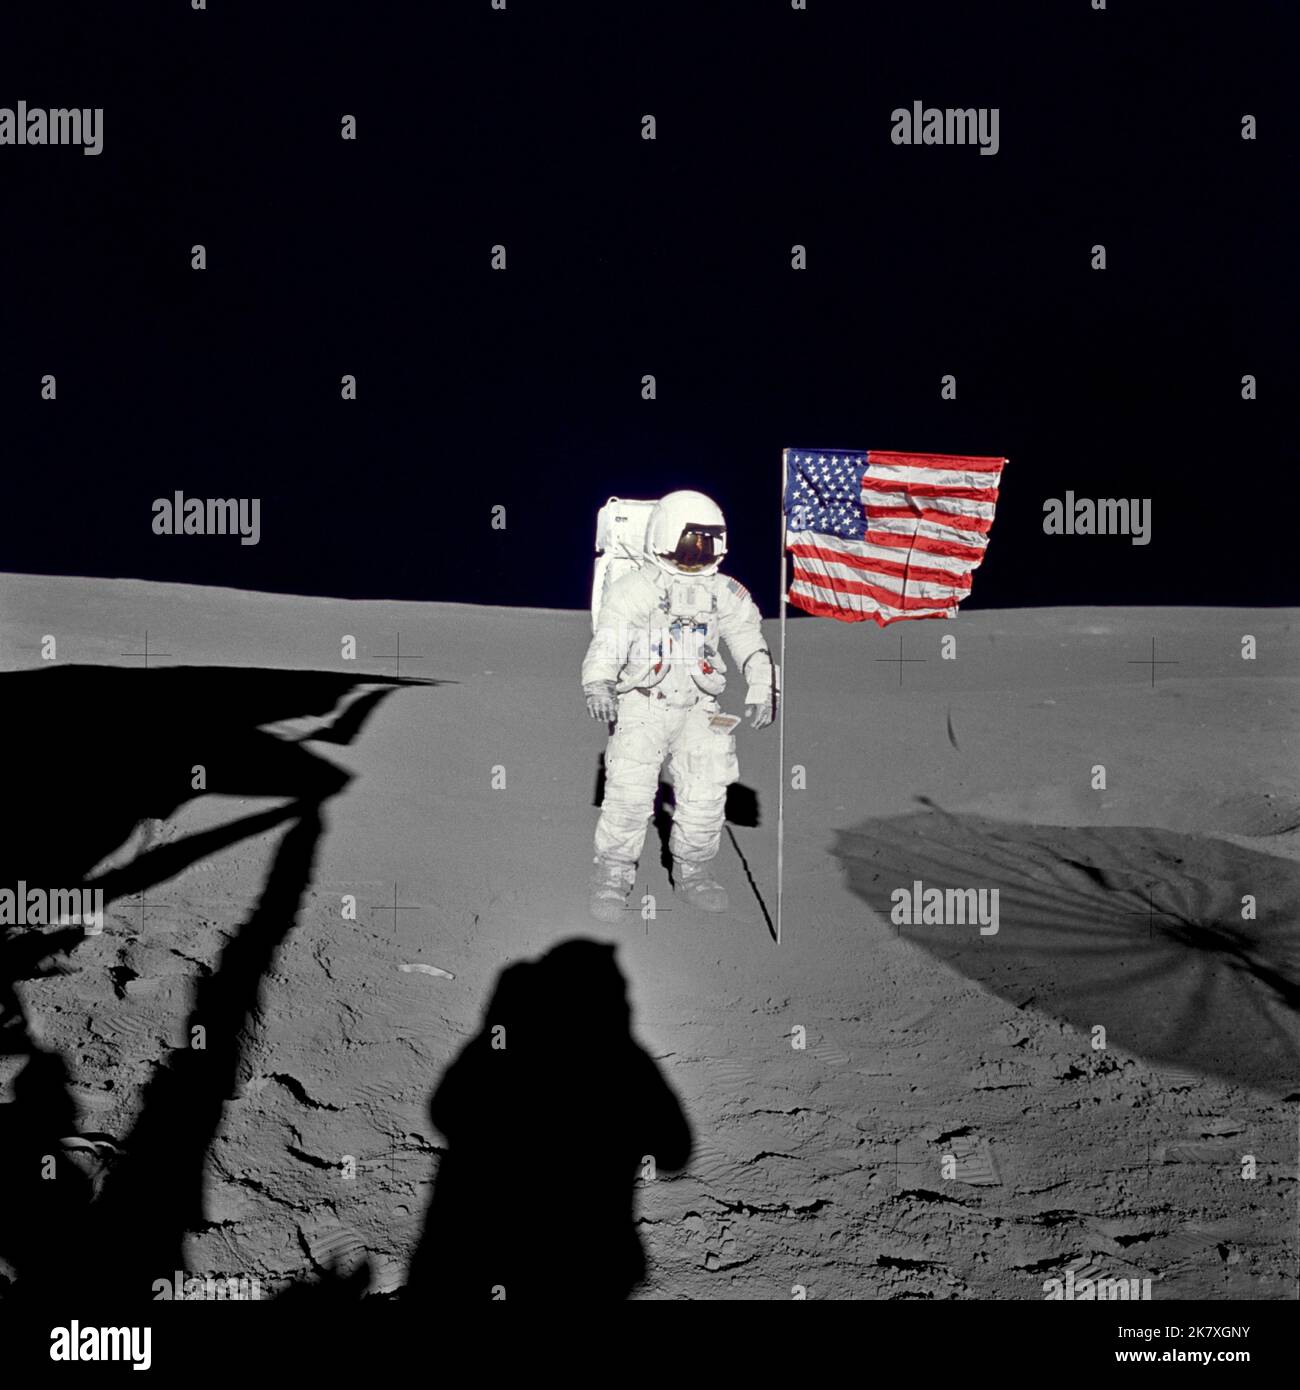 Astronaut Edgar D. Mitchell, Apollo 14 lunar module pilot stands by the deployed U.S. flag on the lunar surface during the early moments of the mission's first spacewalk. Stock Photo